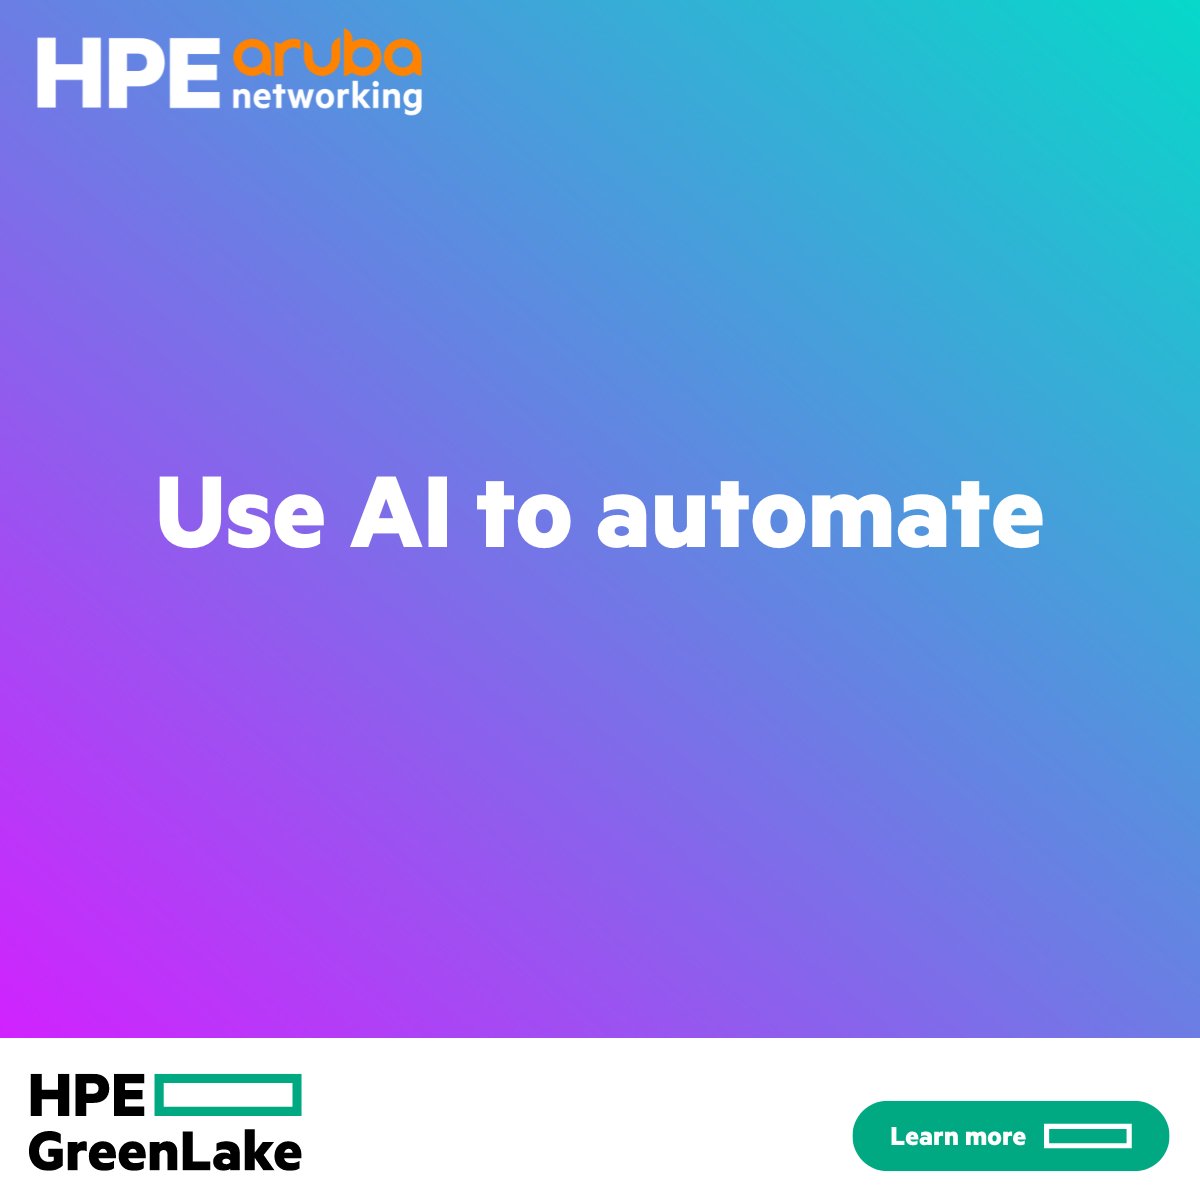 AIOps uses AI to automate IT issue resolution and improve operational efficiency. Learn more: hpe.to/6018eDXaY